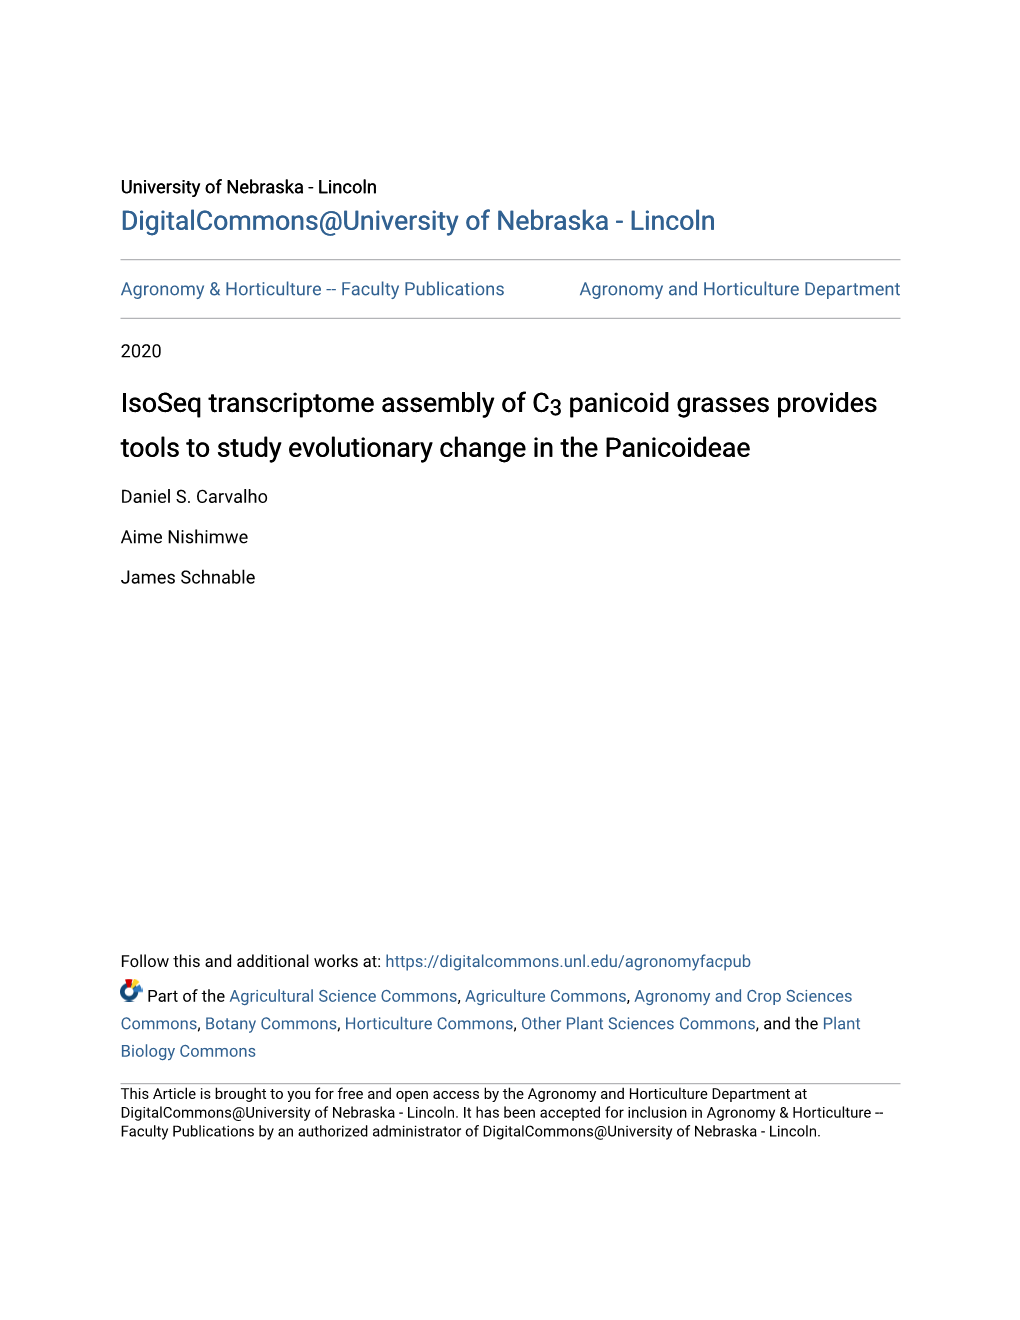 Isoseq Transcriptome Assembly of C 3 Panicoid Grasses Provides Tools To